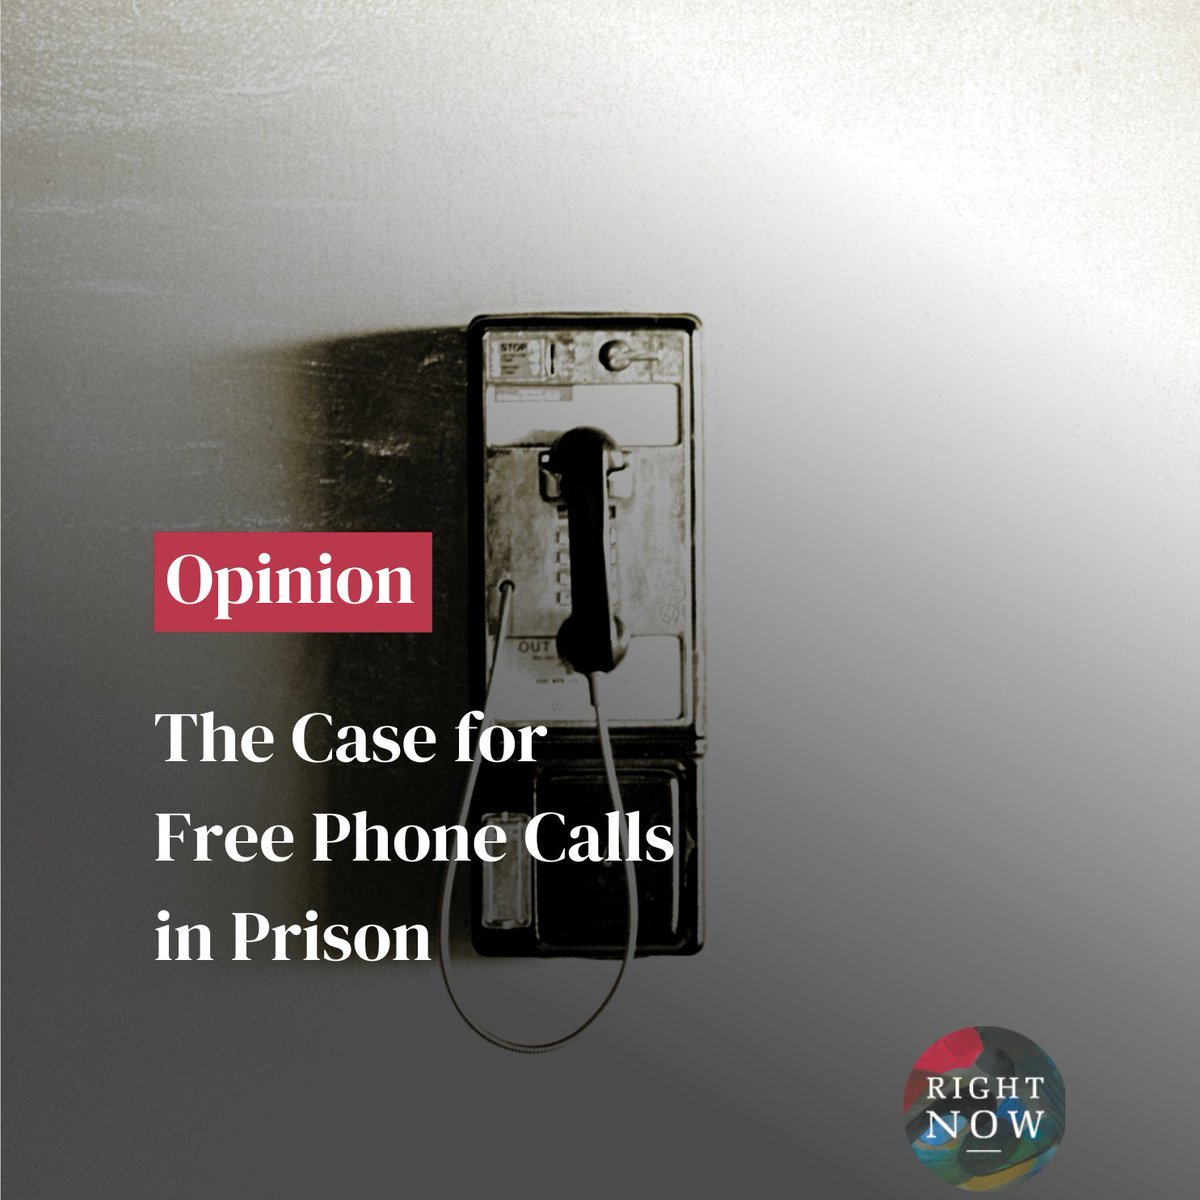 Opinion: Imagine not being able to afford a single phone call to your family? That’s the reality for people in Australian prisons. @monique_hurley and @Sarah__Schwartz explain why phone calls in prison should be free. rightnow.org.au/opinion/the-ca…